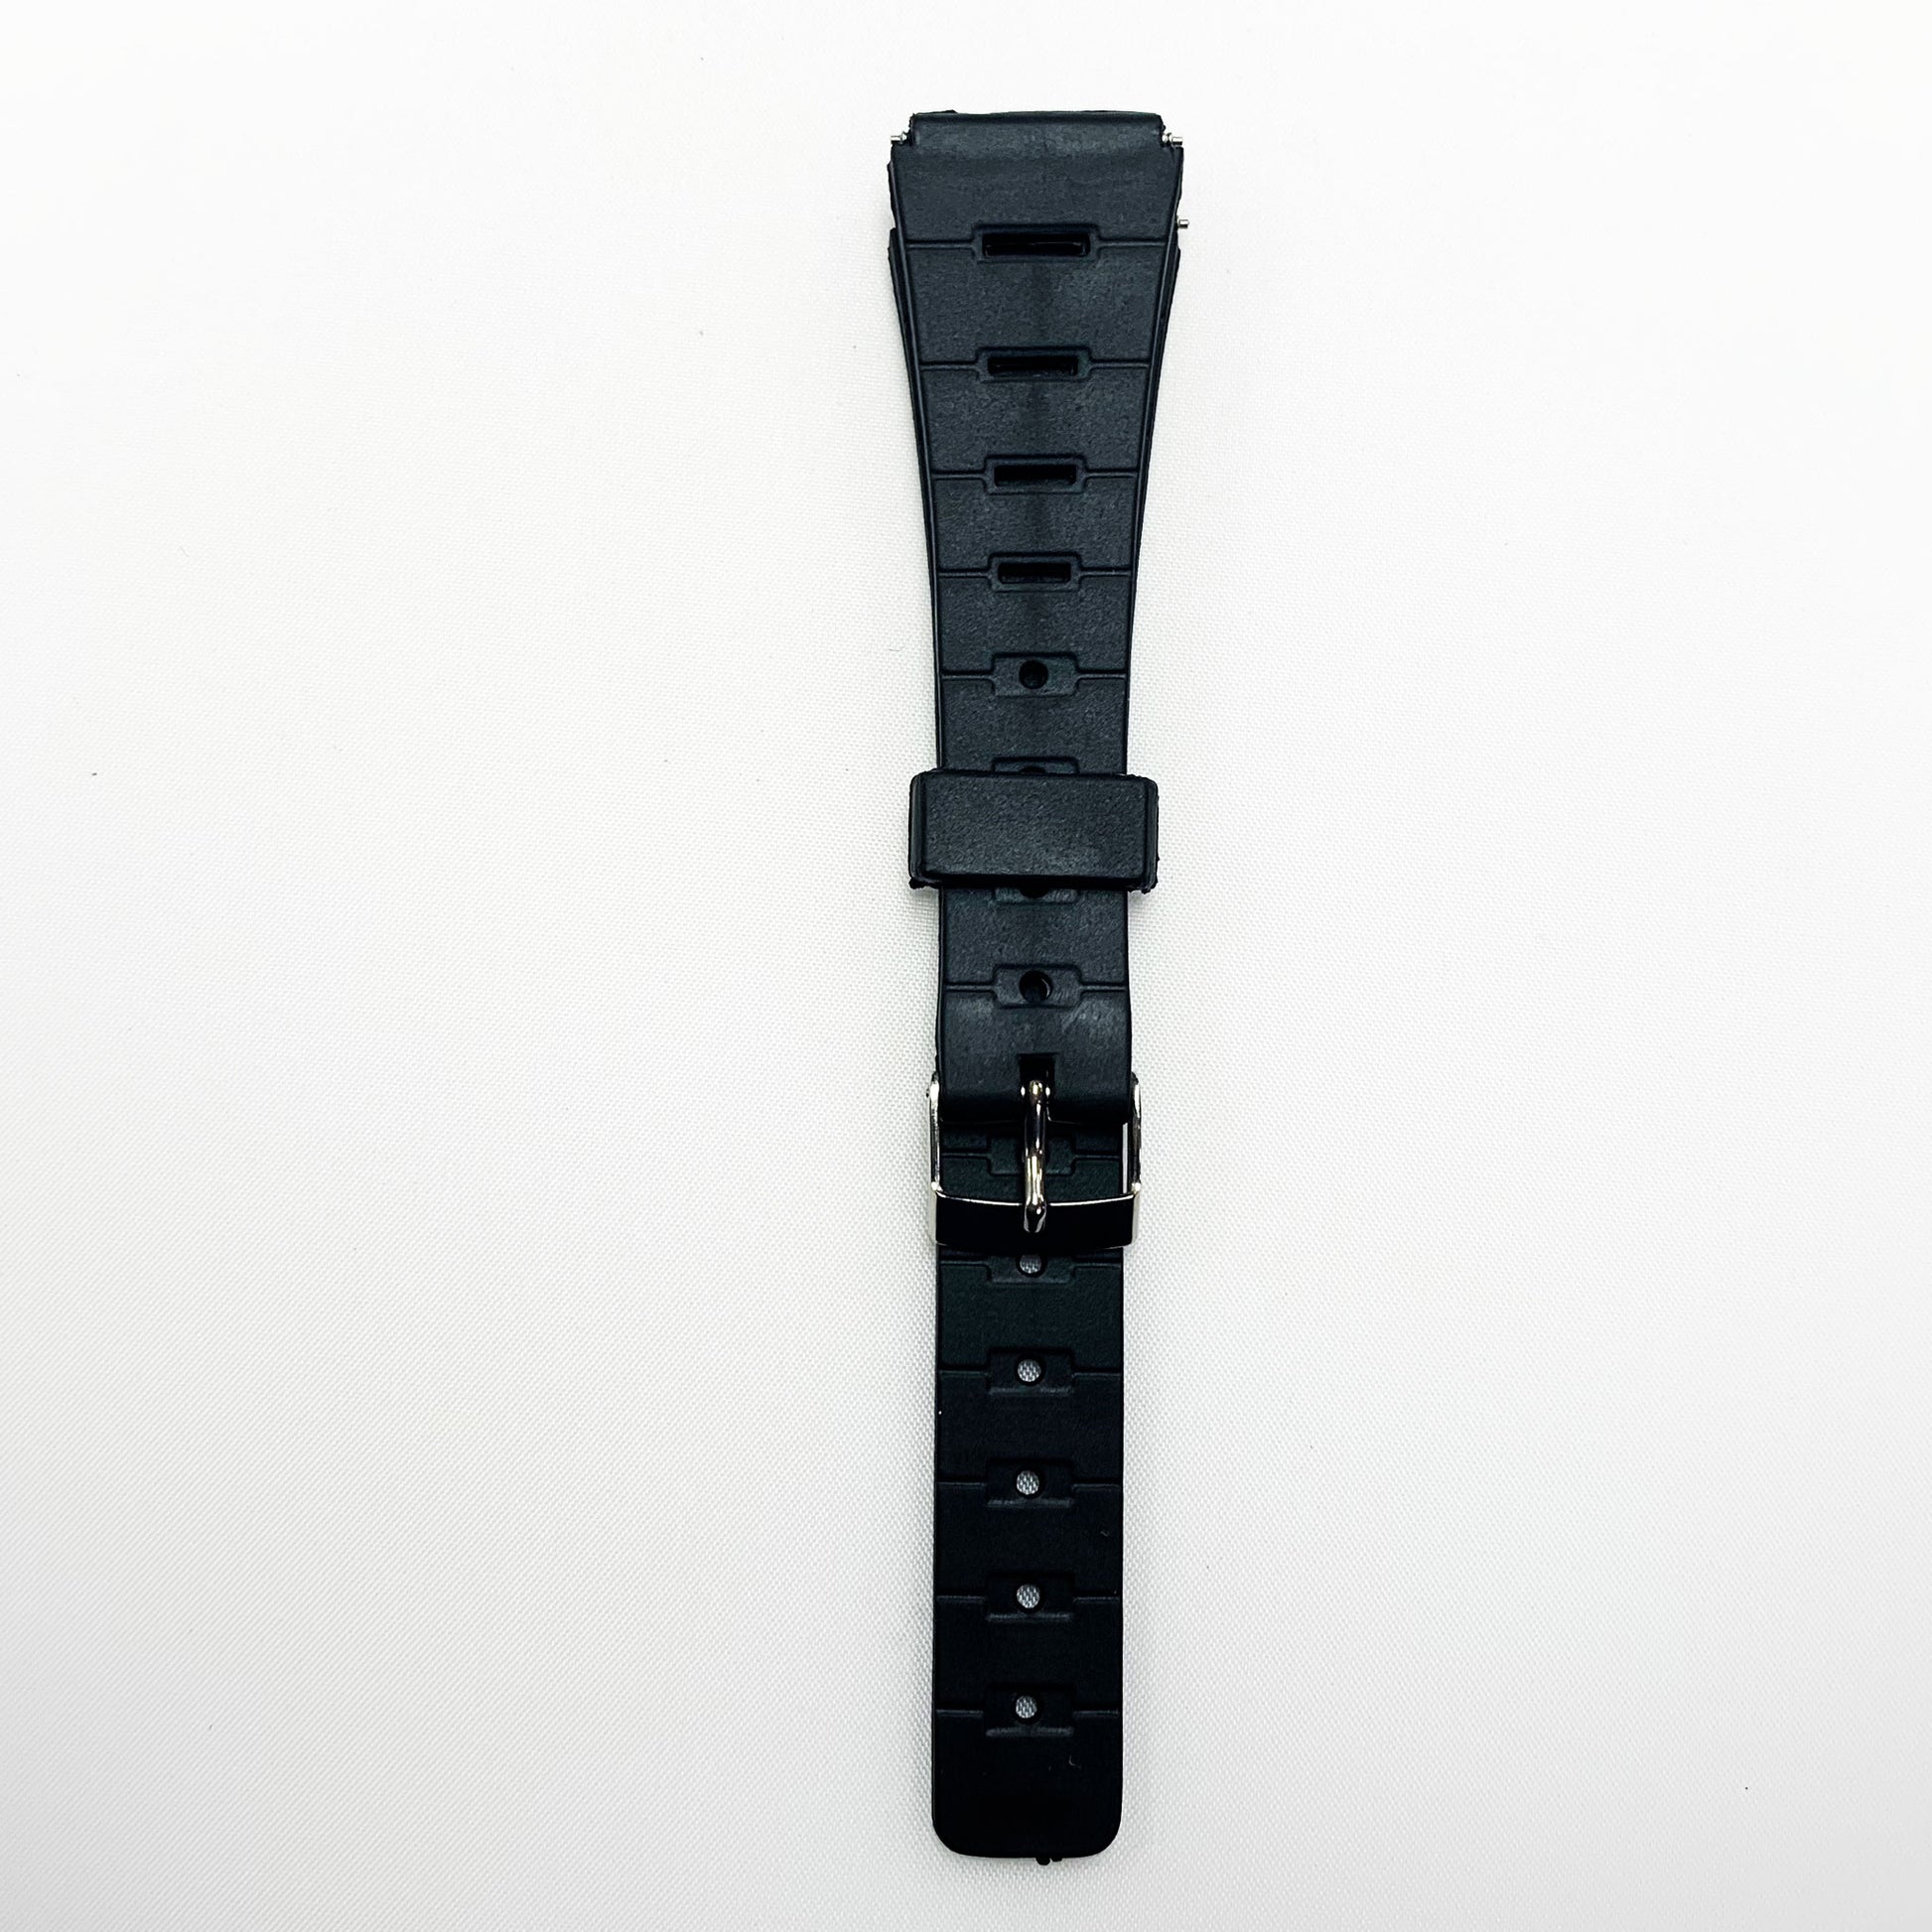 20 mm pvc watch band with black color quick release xxl size watch strap 1